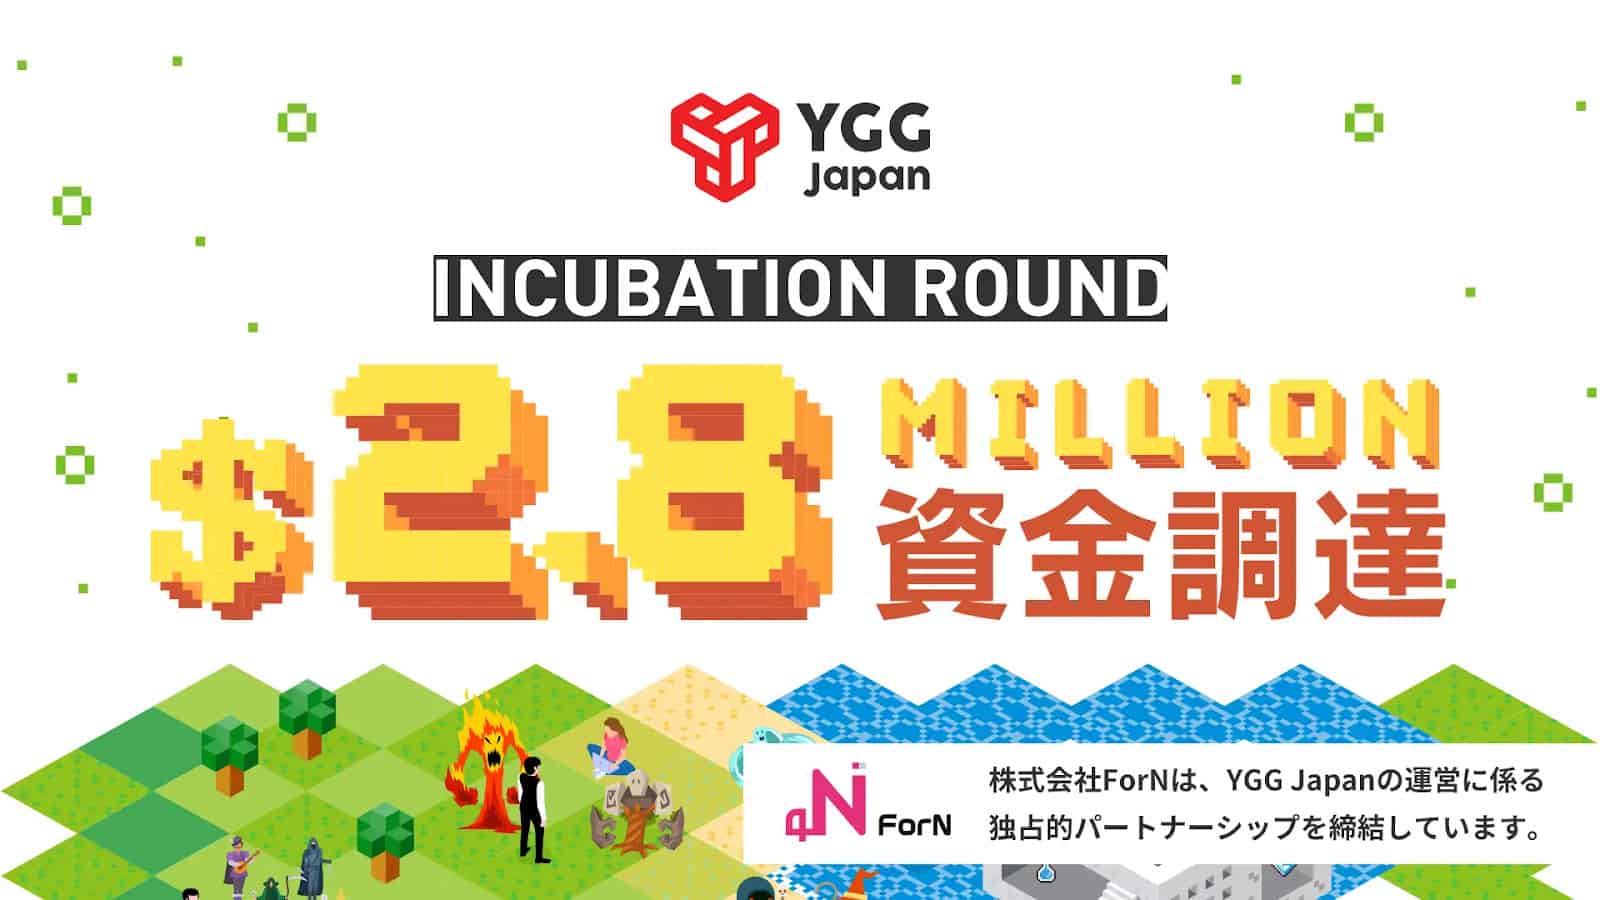 YGG incubation round 1 YGG Japan announces that the company has completed .8 million in an incubation round. The funding was given by a number of investors and VCs including YGG and YGGSEA.